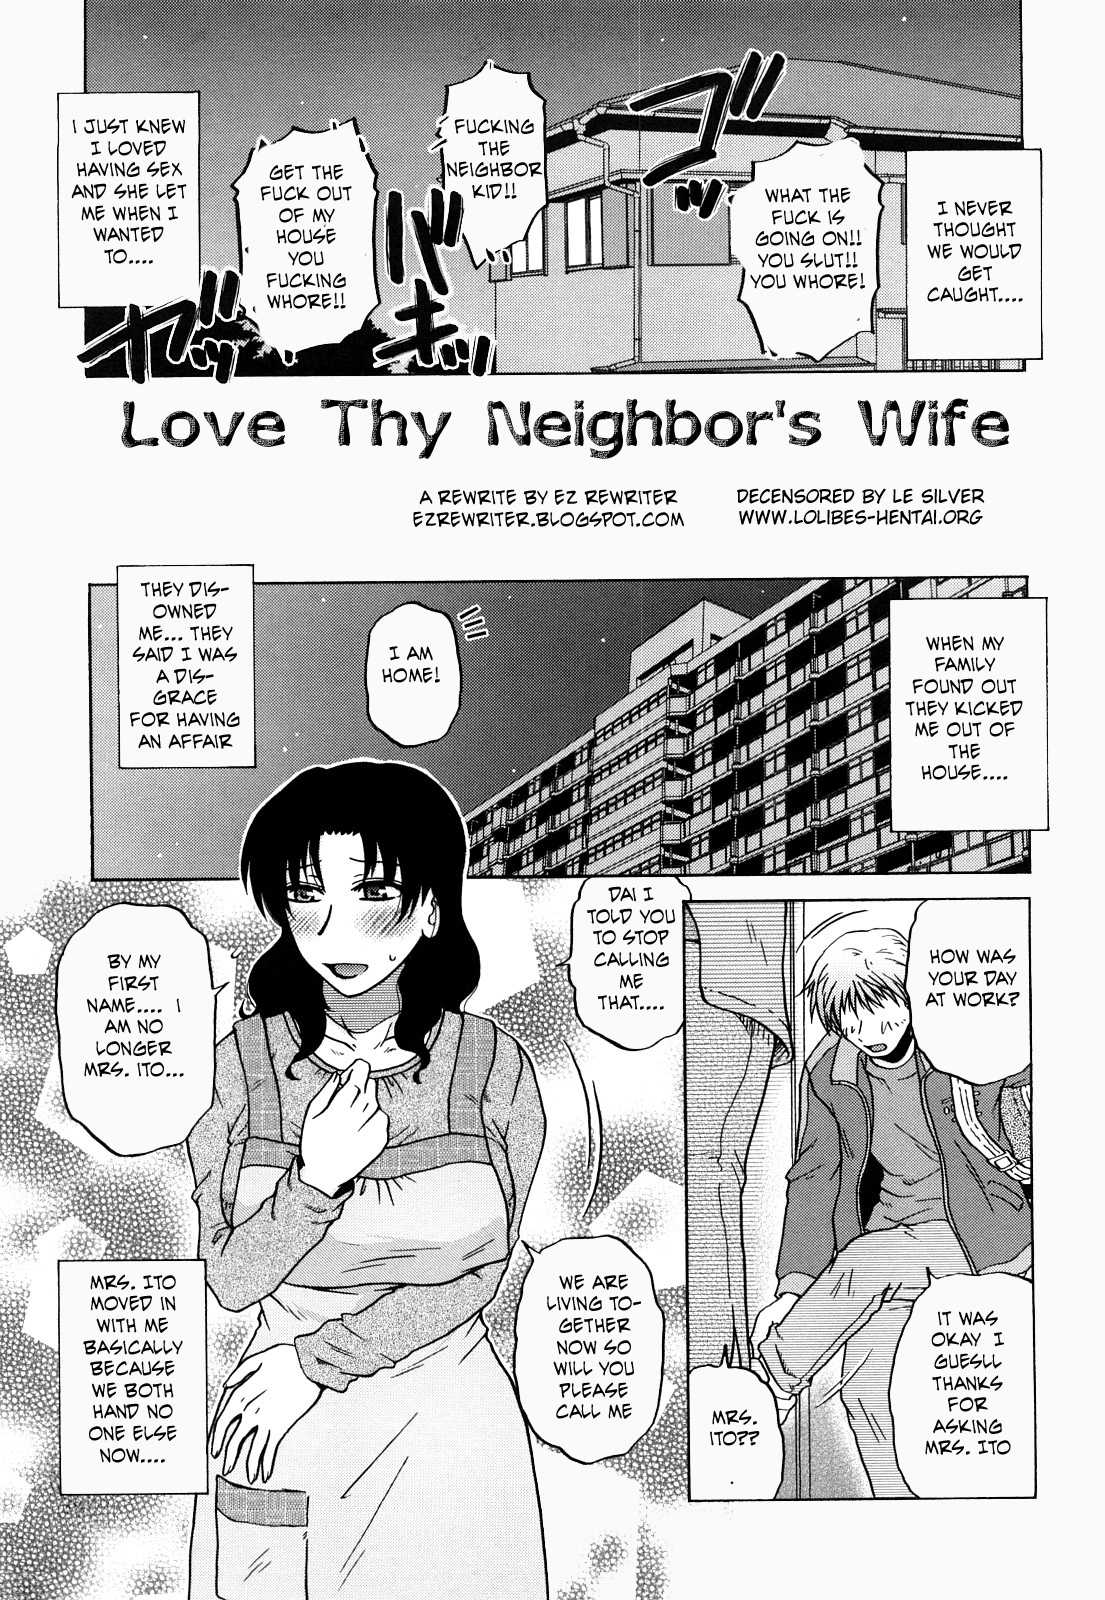 Love Thy Neighbor&#039;s Wife (english, by ezrewriter) [DECENSORED by Le Silver] 